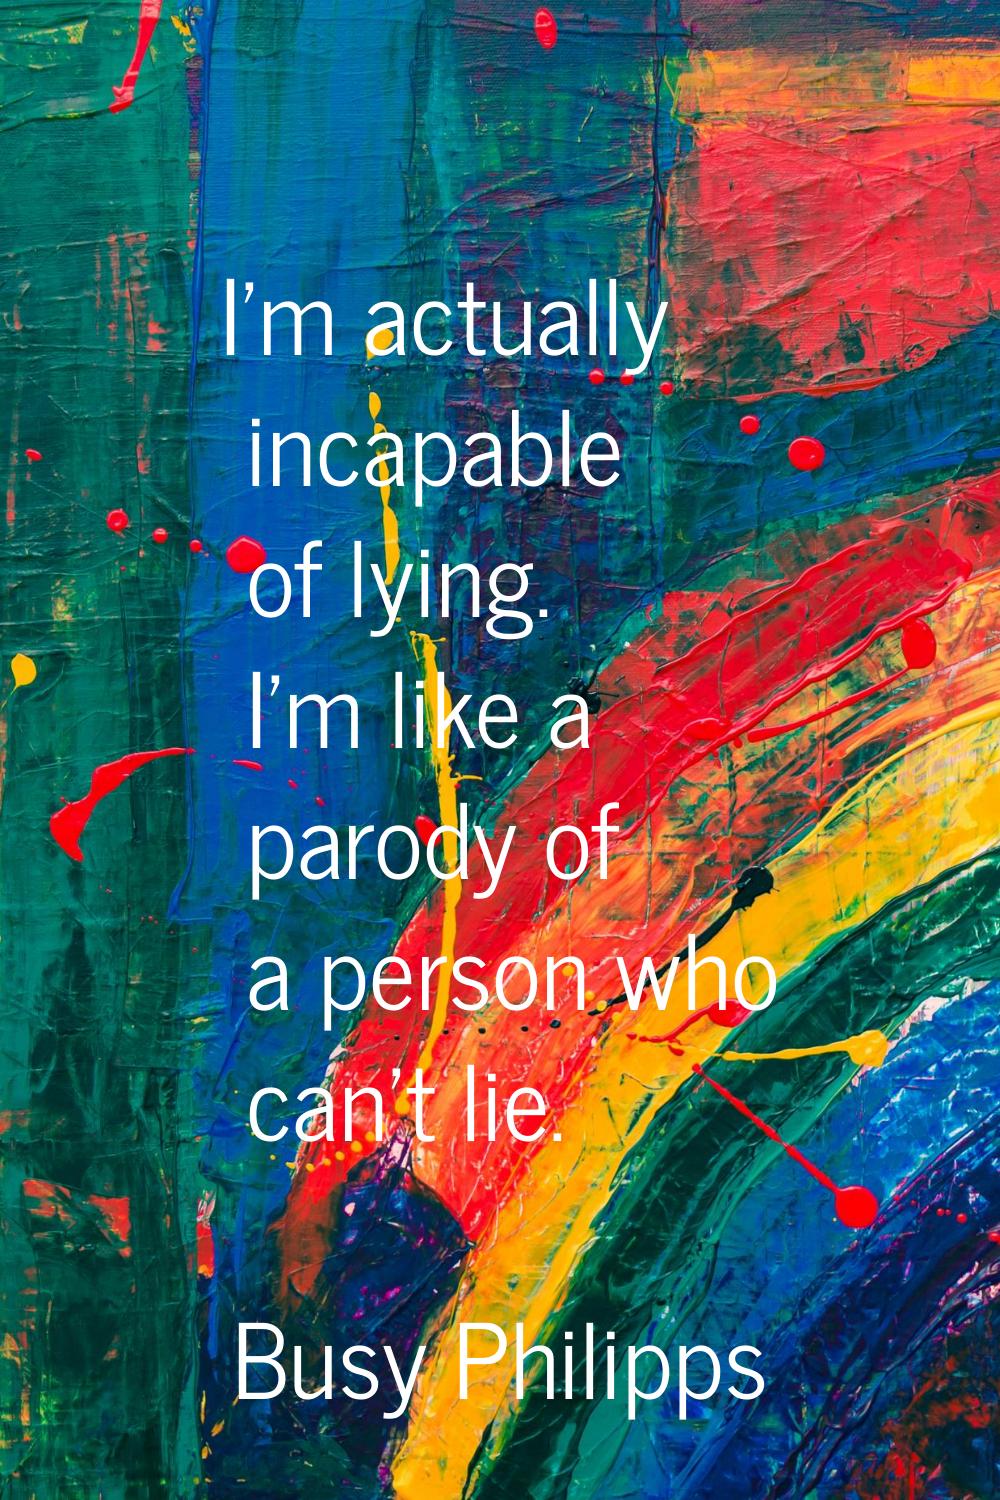 I'm actually incapable of lying. I'm like a parody of a person who can't lie.